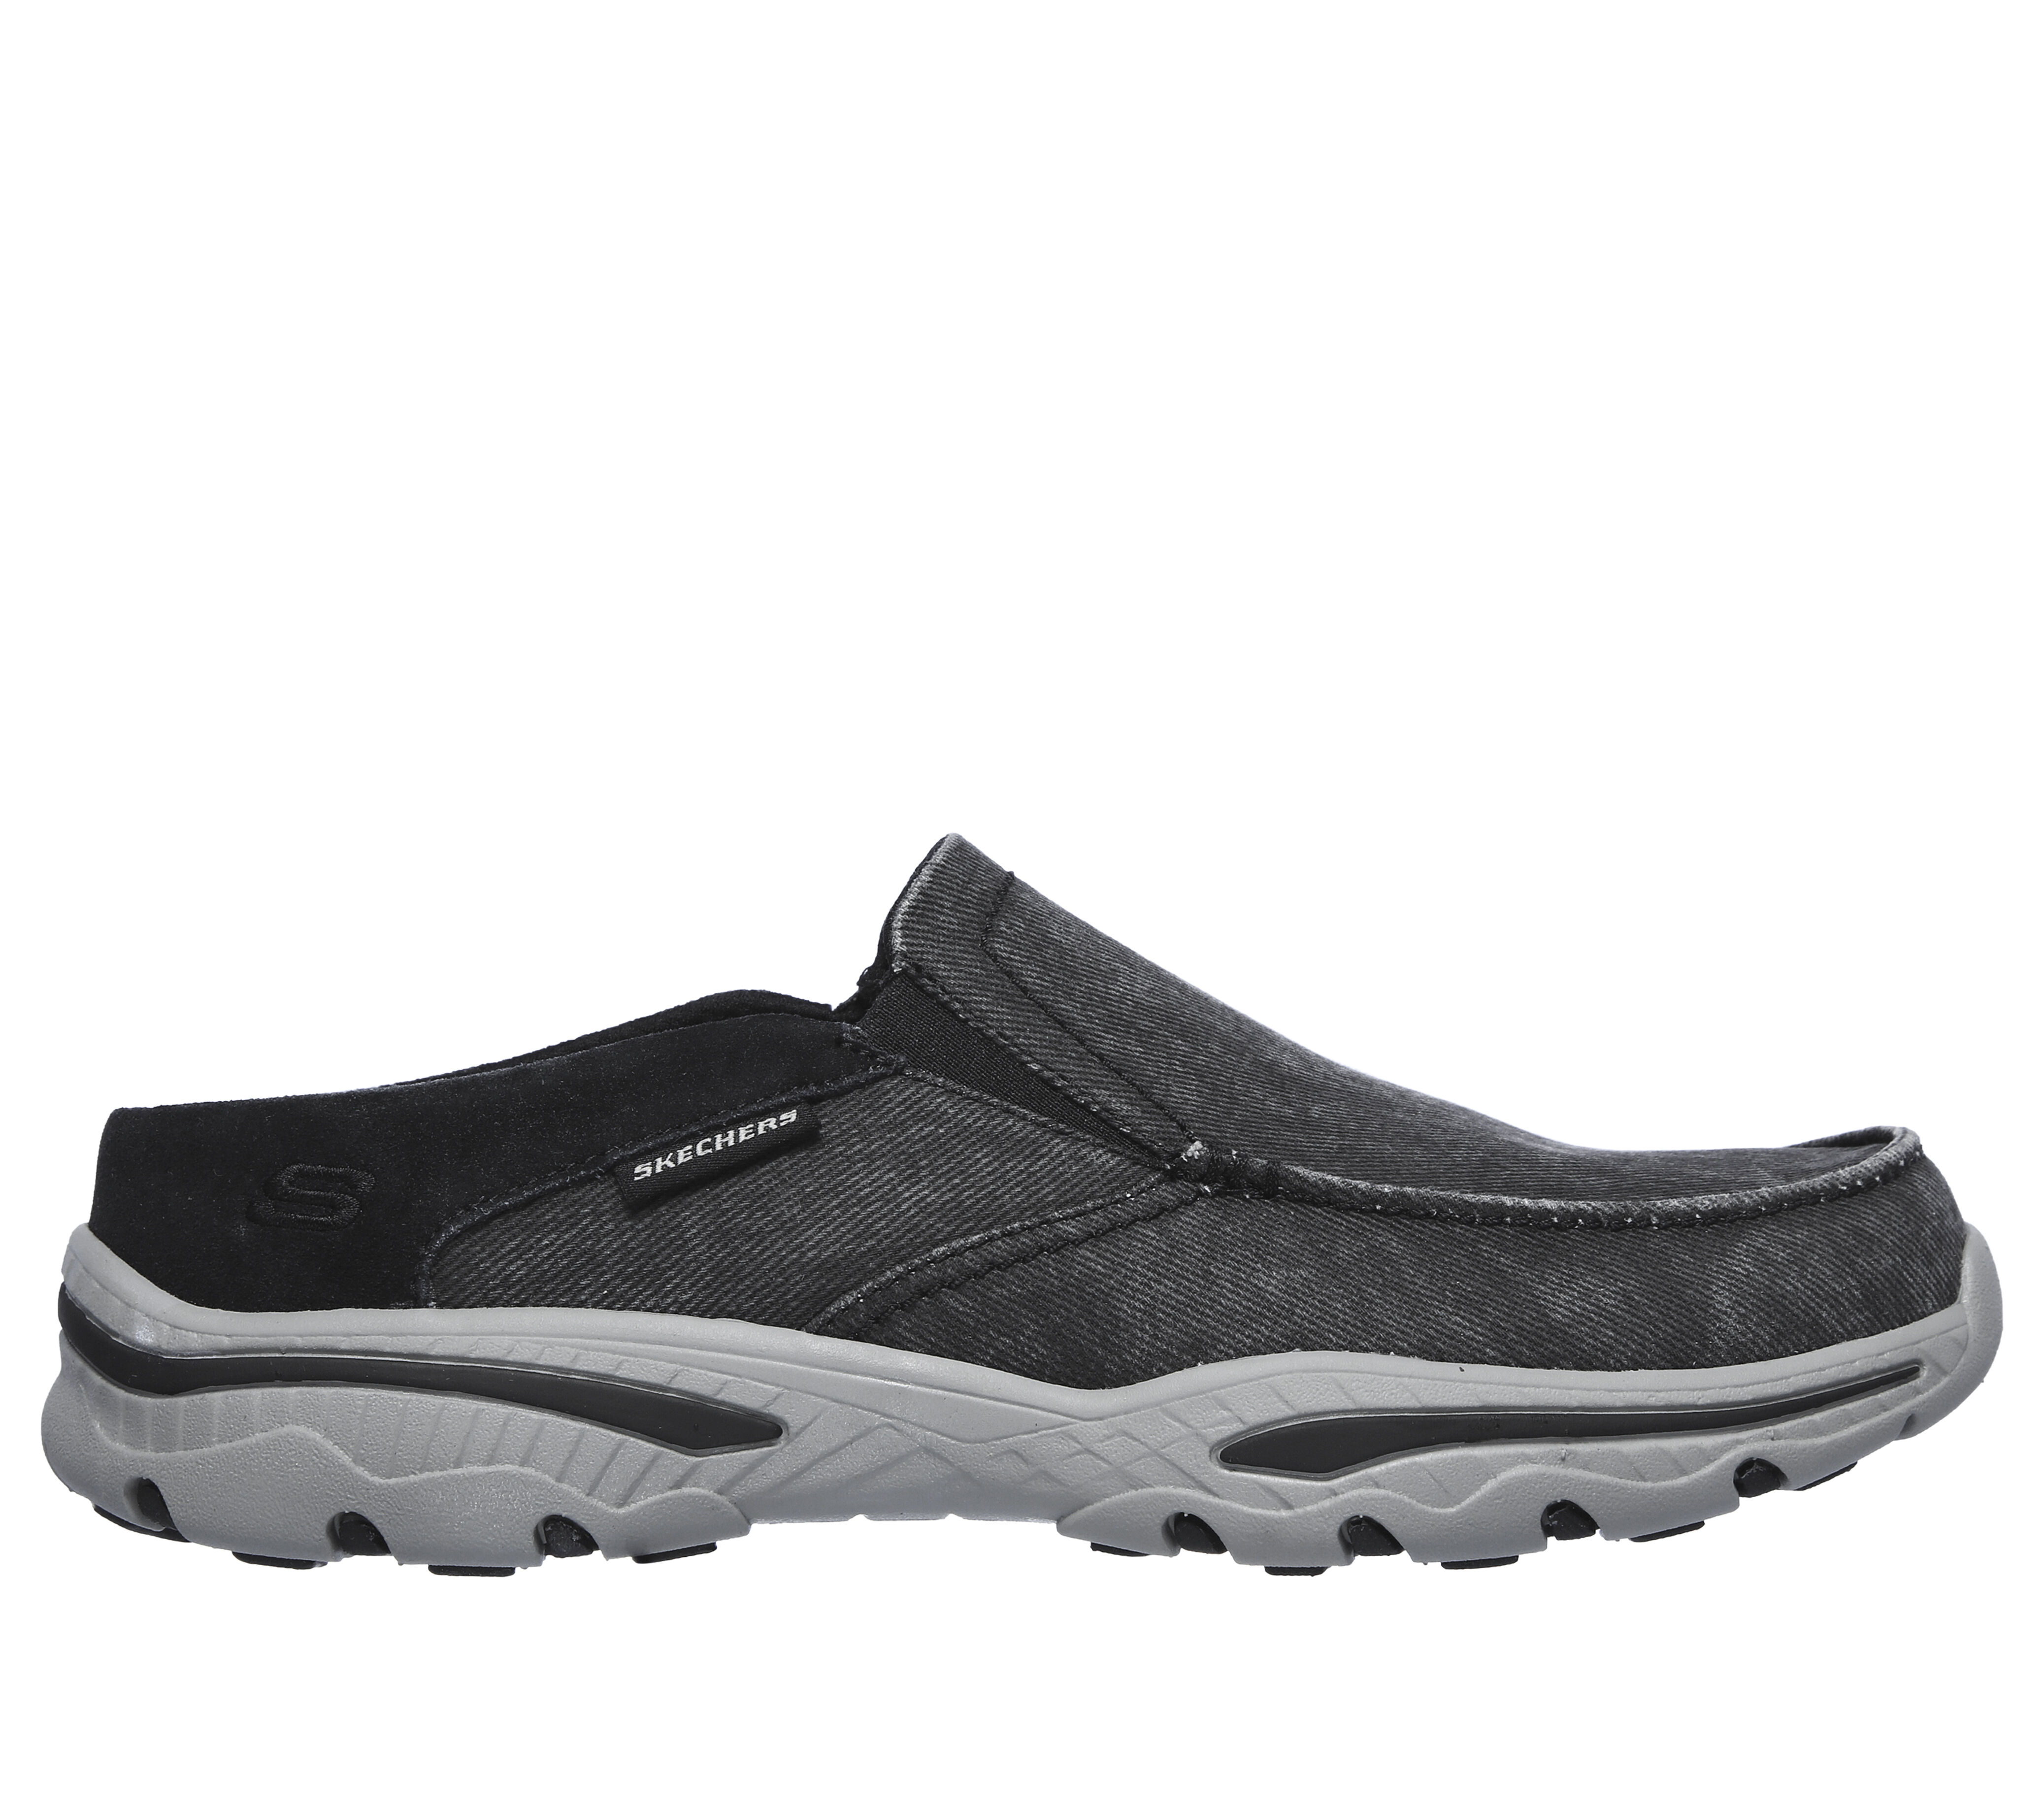 mens backless shoes skechers